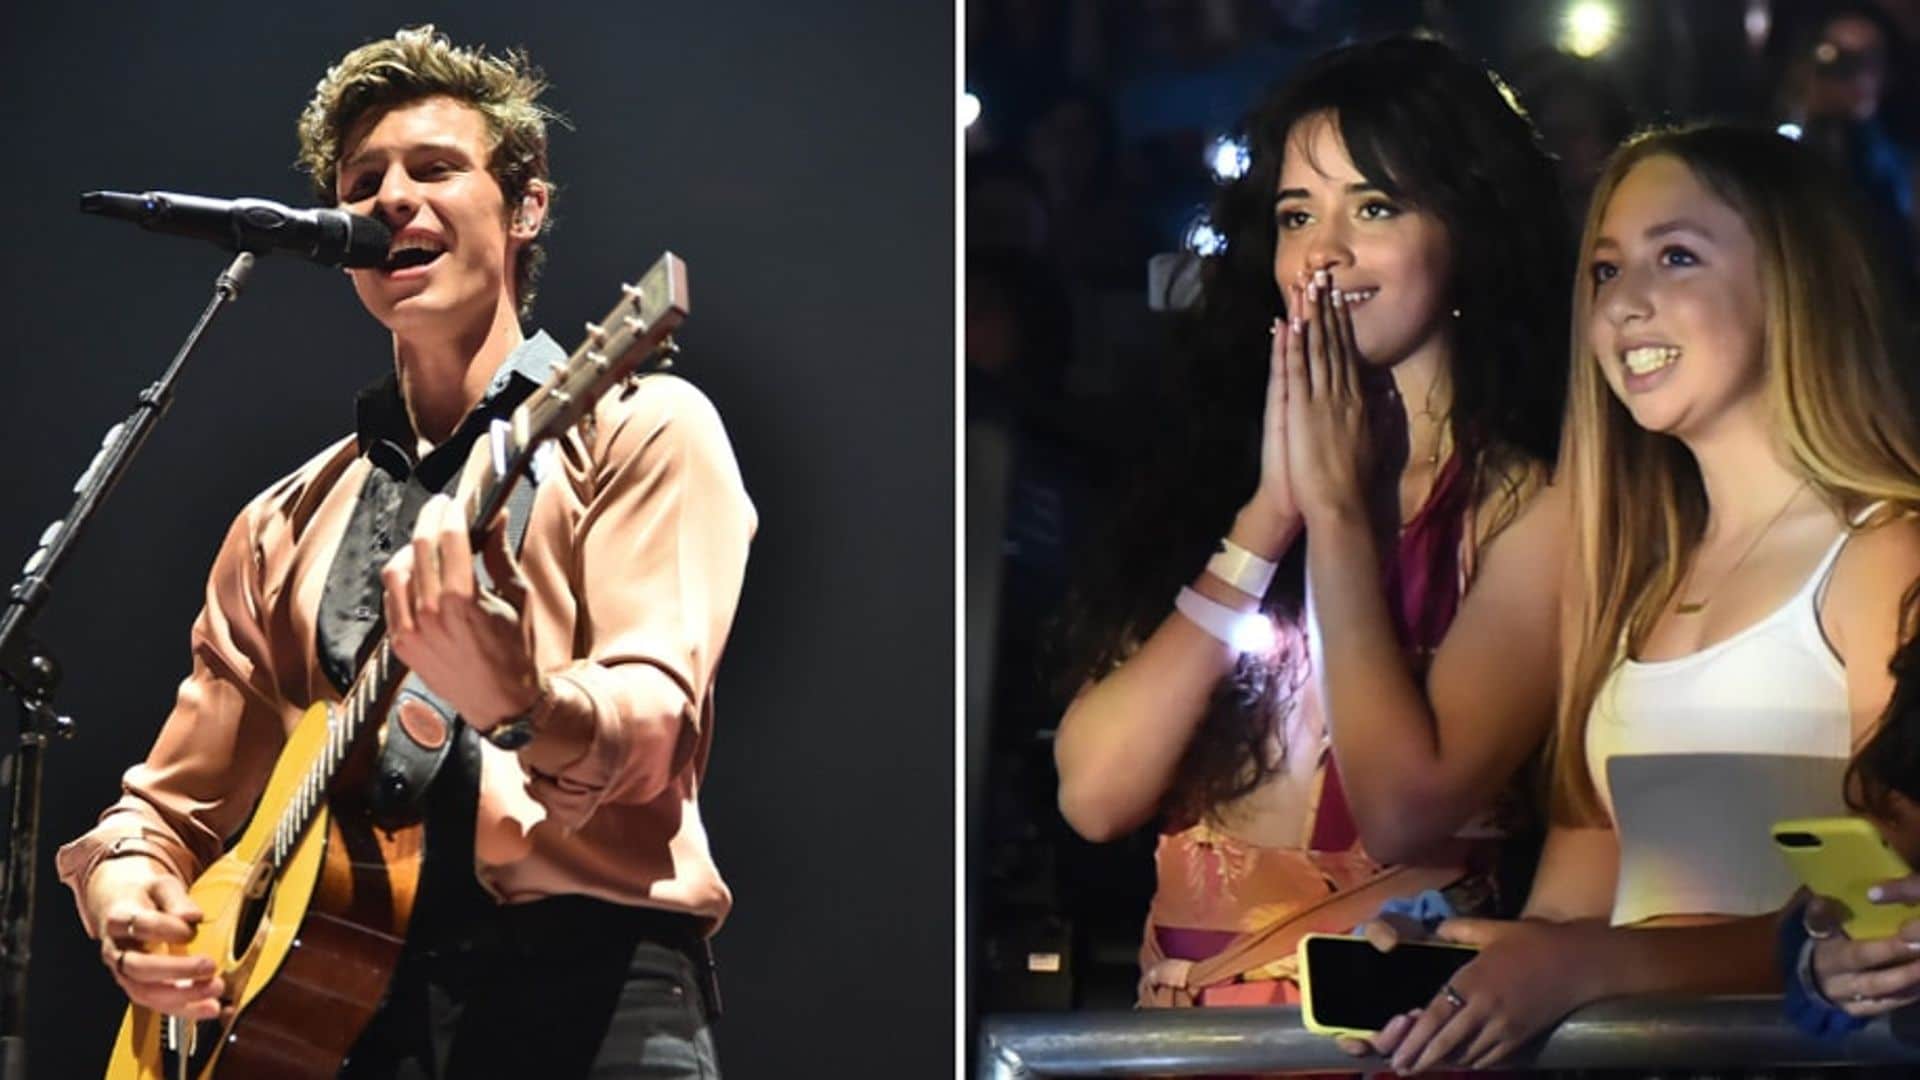 Camila Cabello watching Shawn Mendes perform is the most adorable thing ever